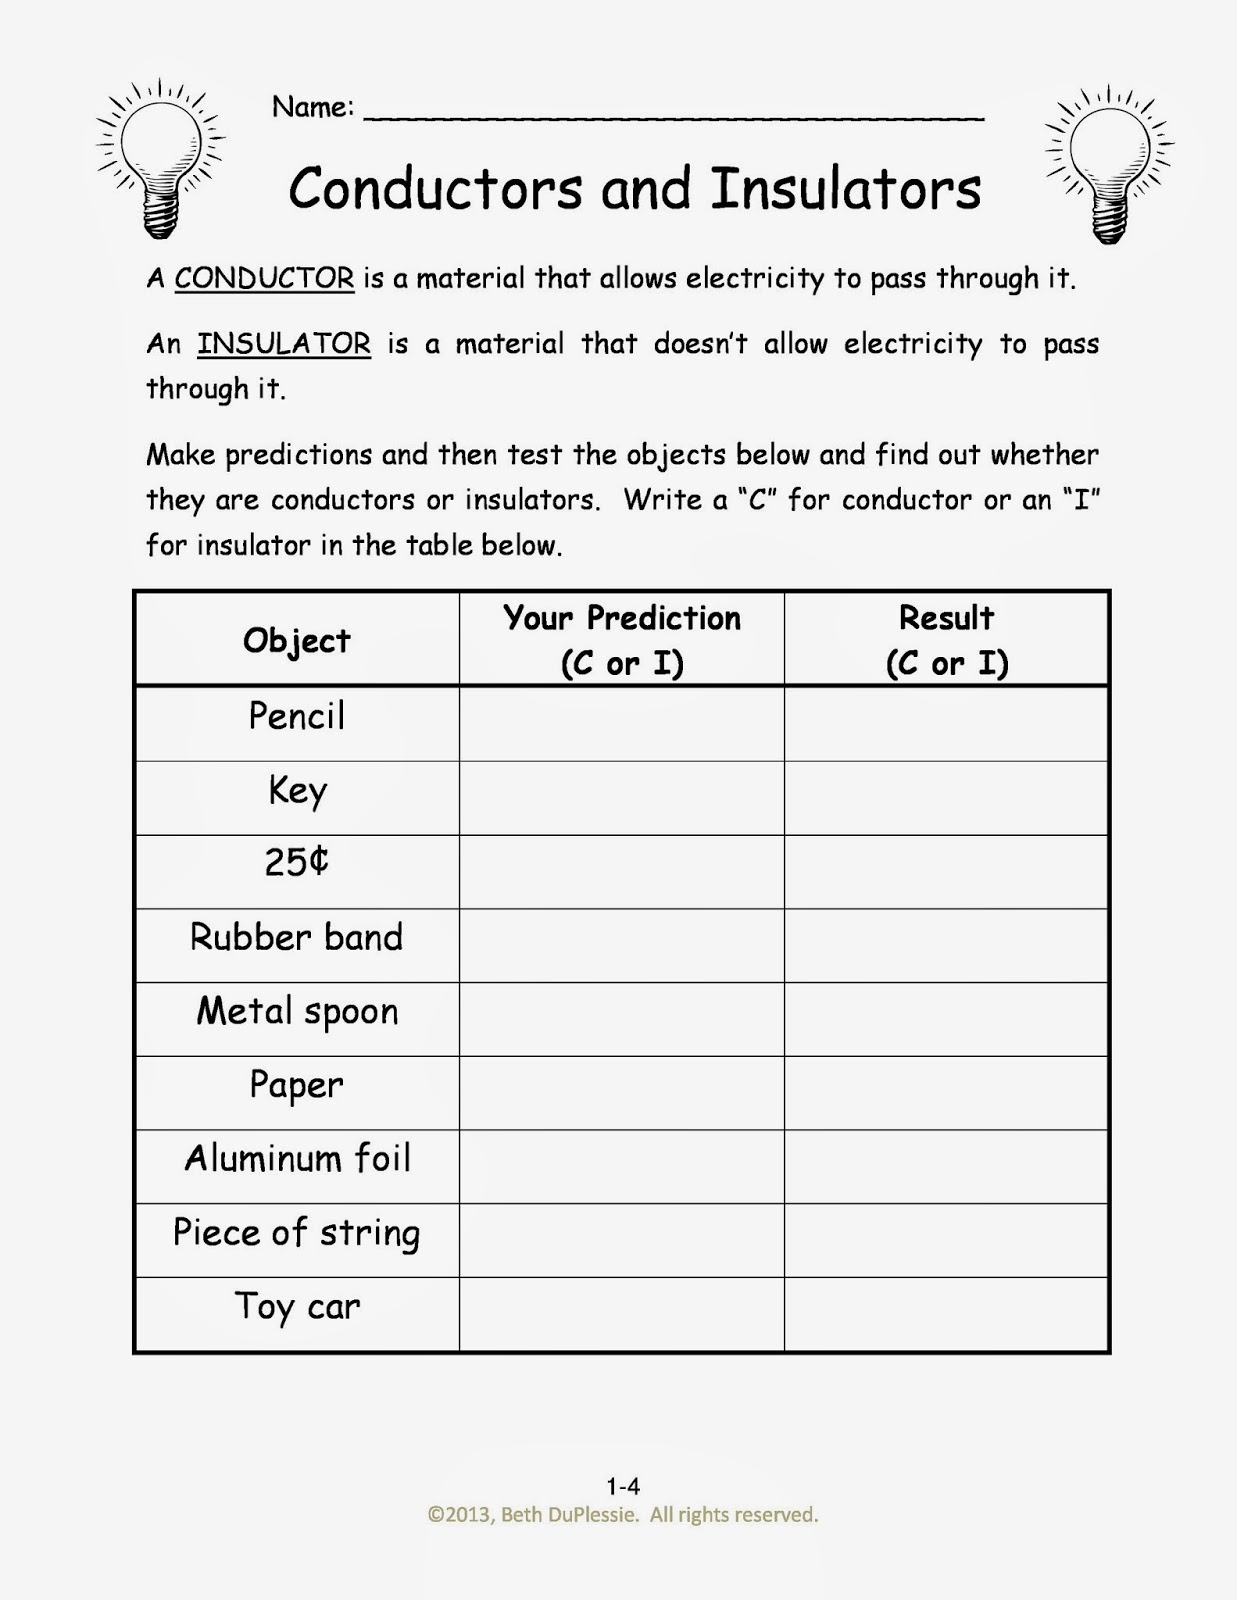 Conductors And Insulators Lesson Plans 24th Grade - Lesson Plans Pertaining To Conductors And Insulators Worksheet